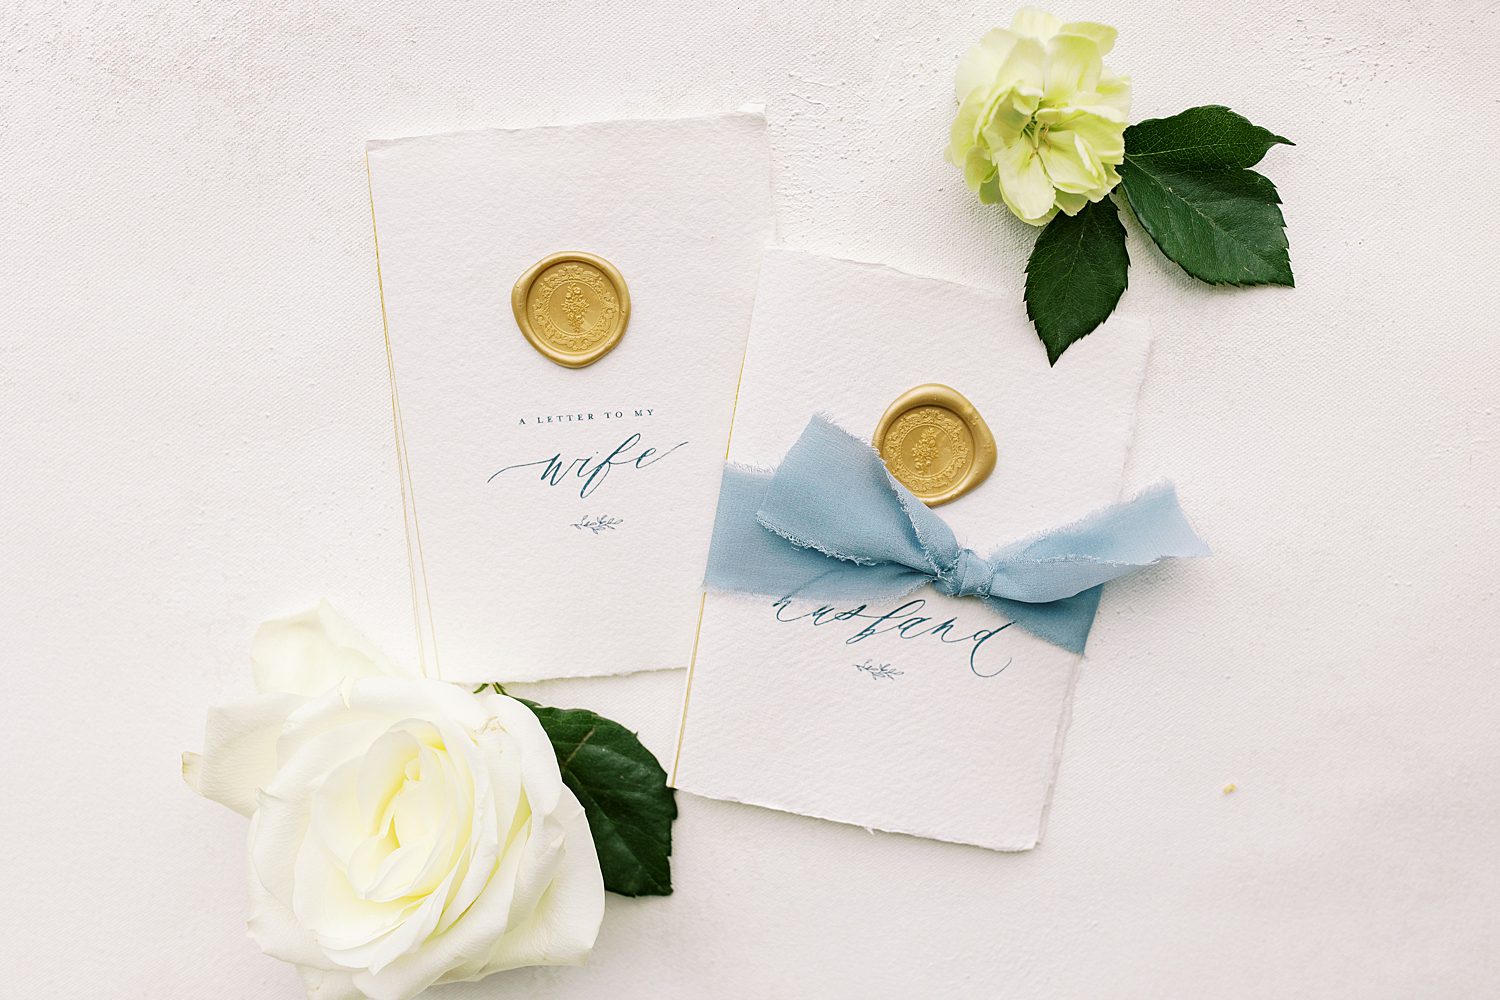 vow booklets with gold wax seals and blue ribbons